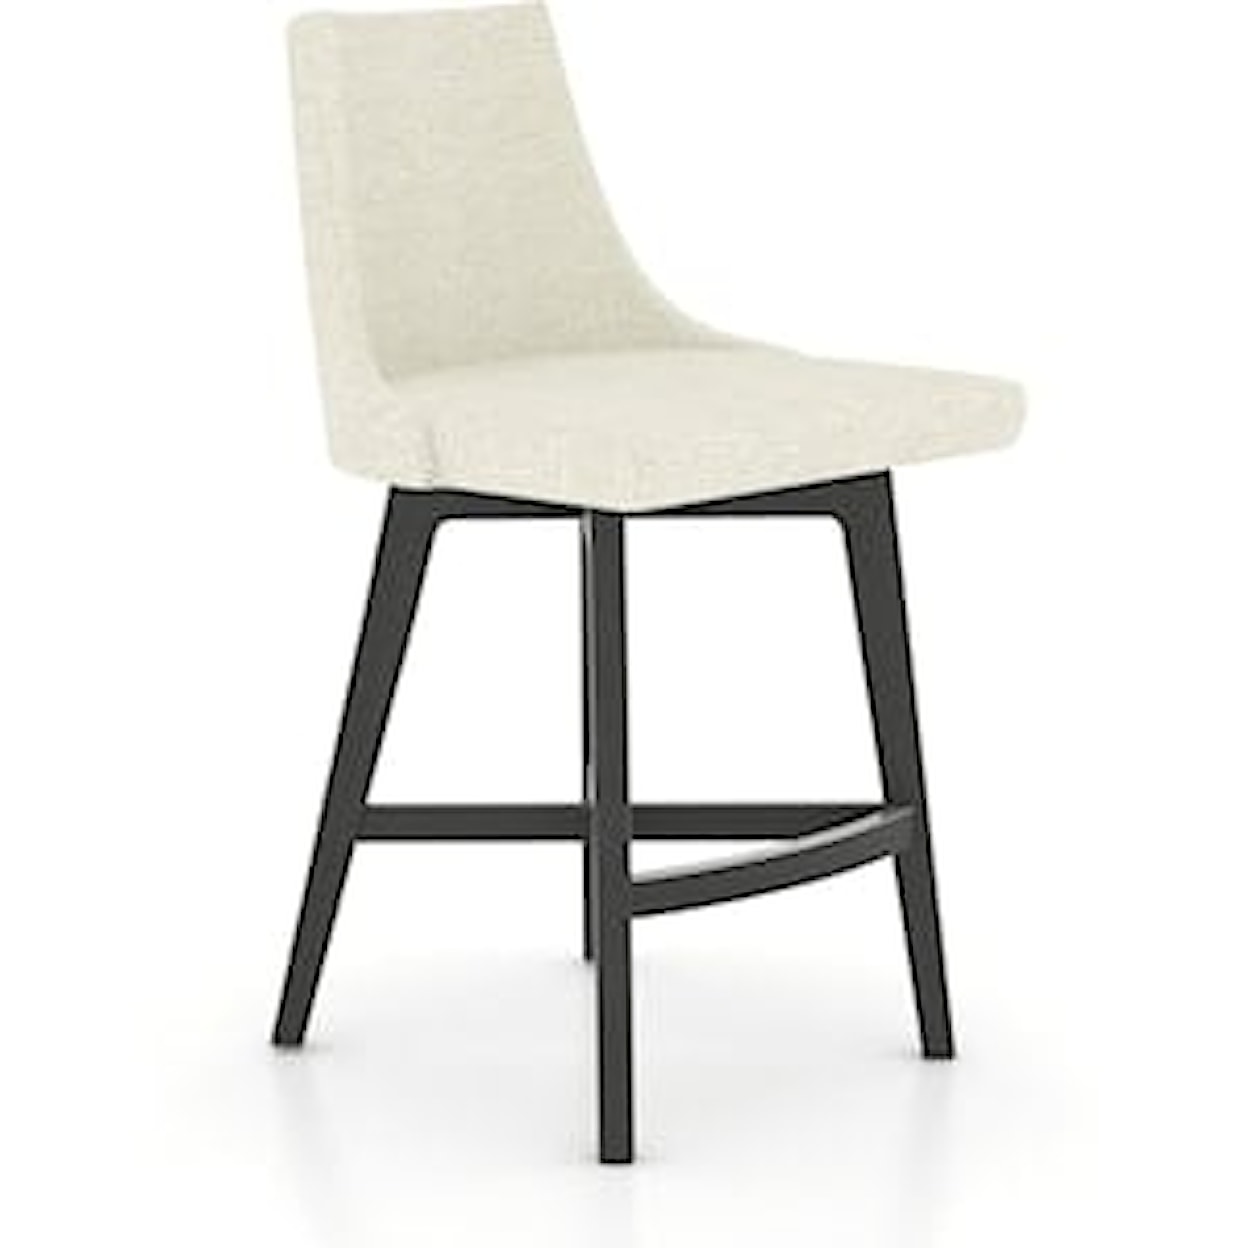 Canadel Downtown Upholstered fixed stool